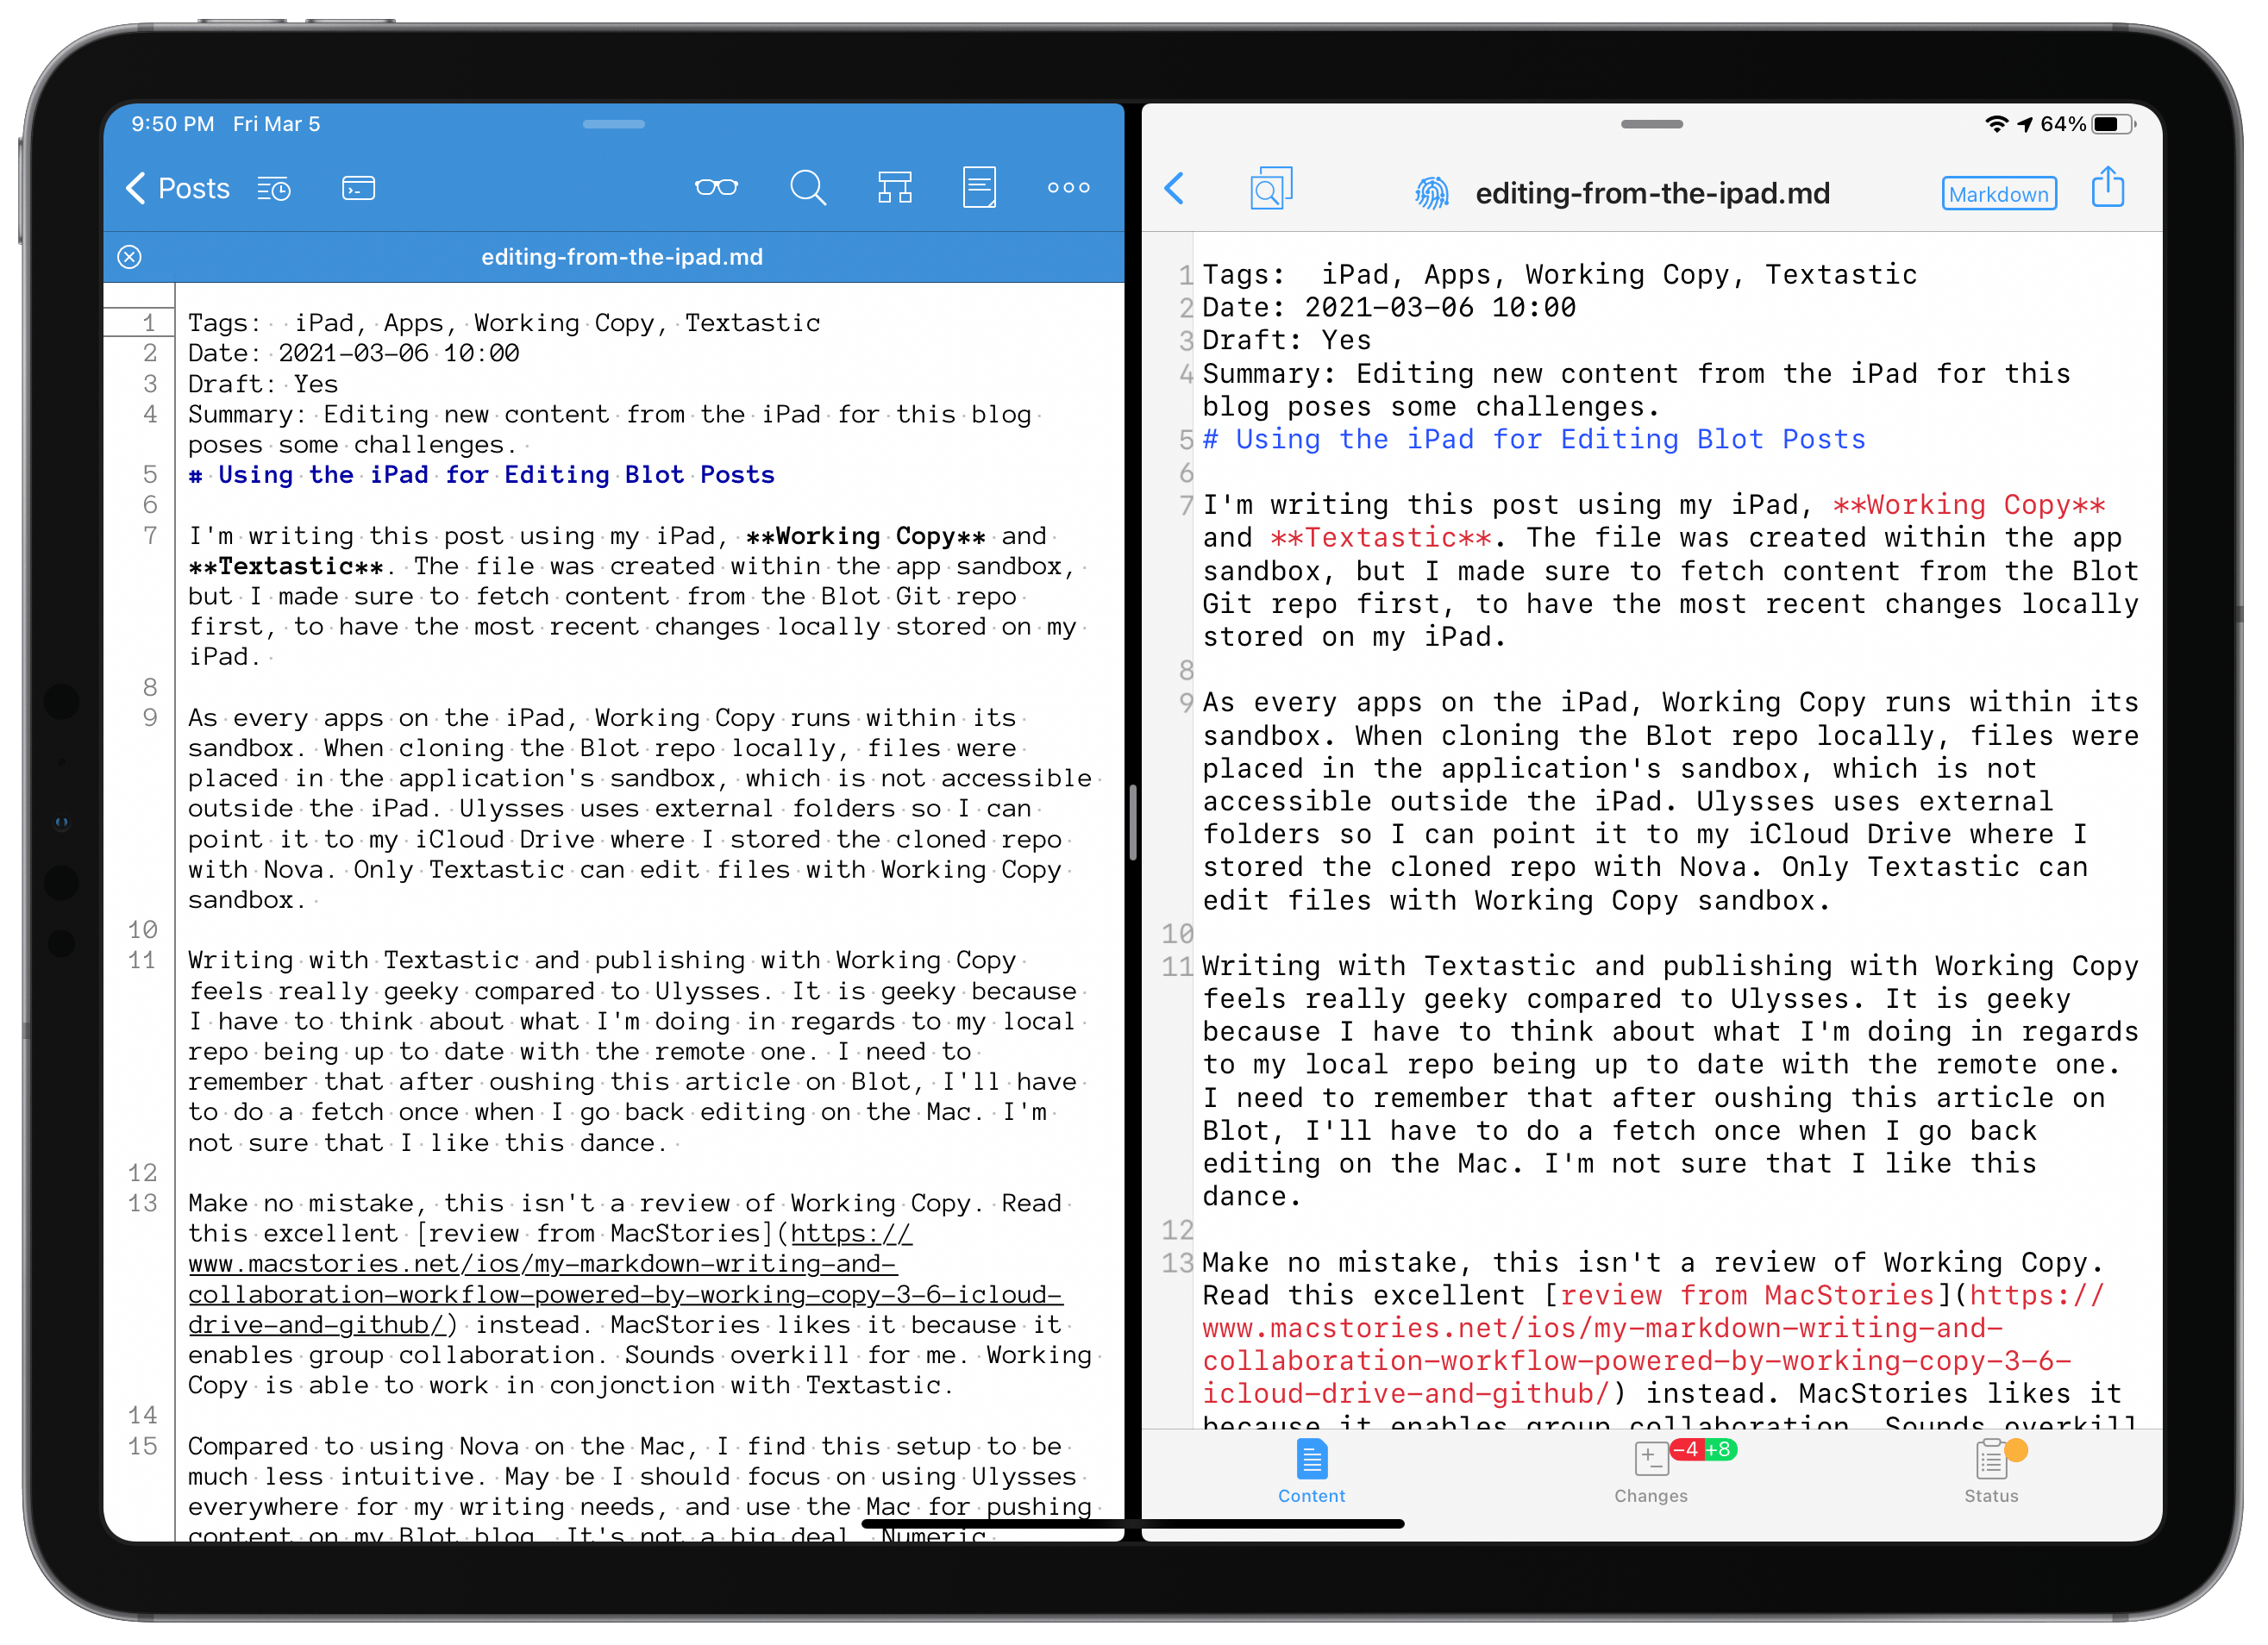 Textastic on the left, Working Copy on the right.